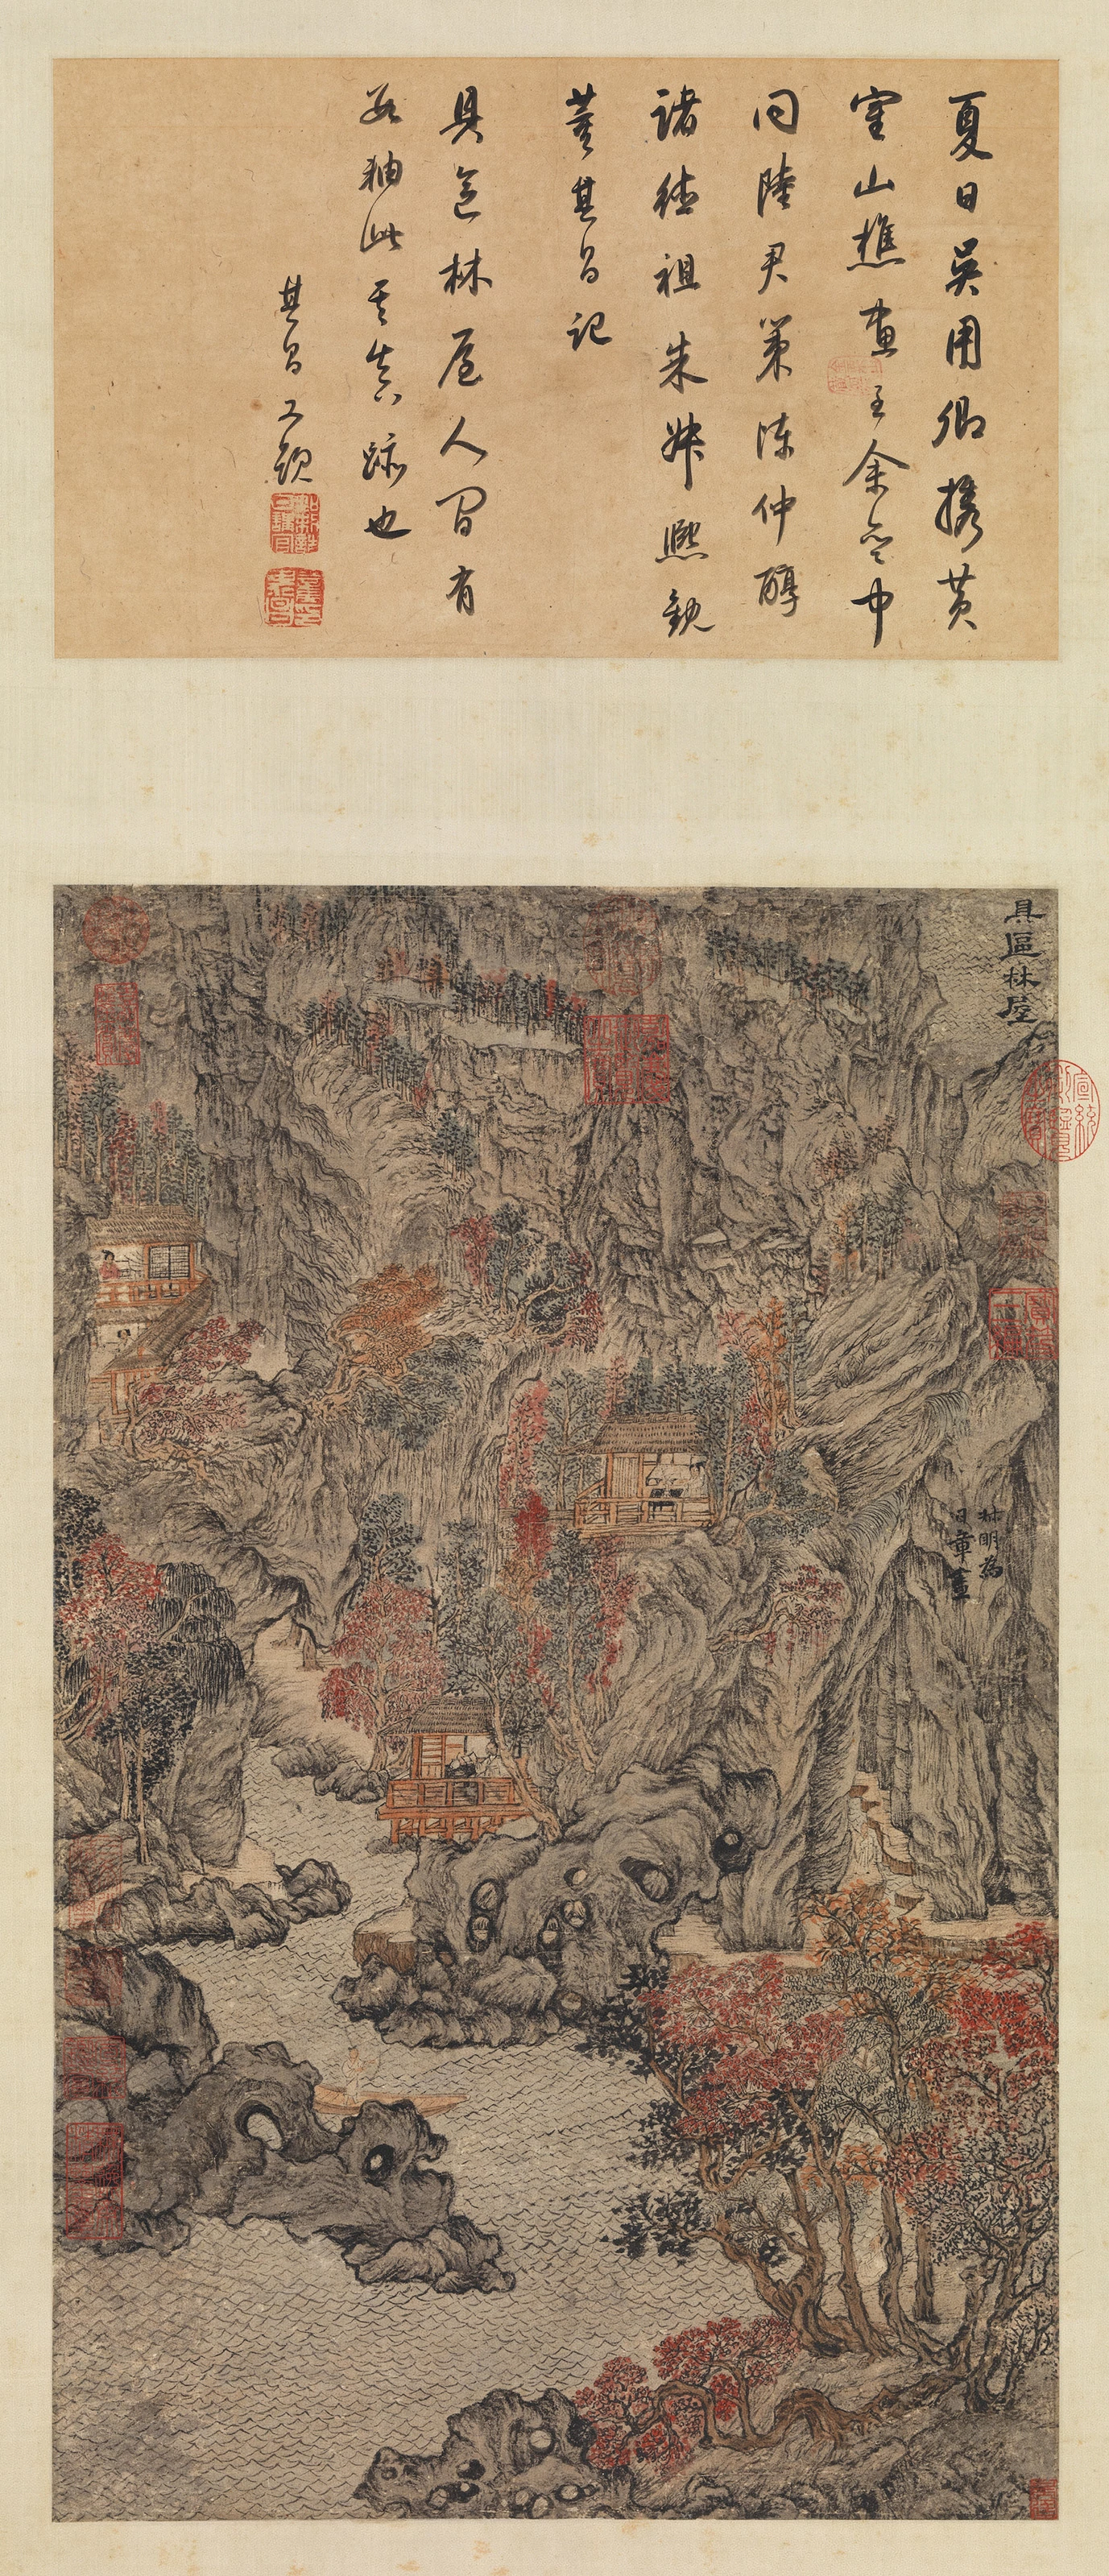 Forest Grotto in Juqu, Wang Meng